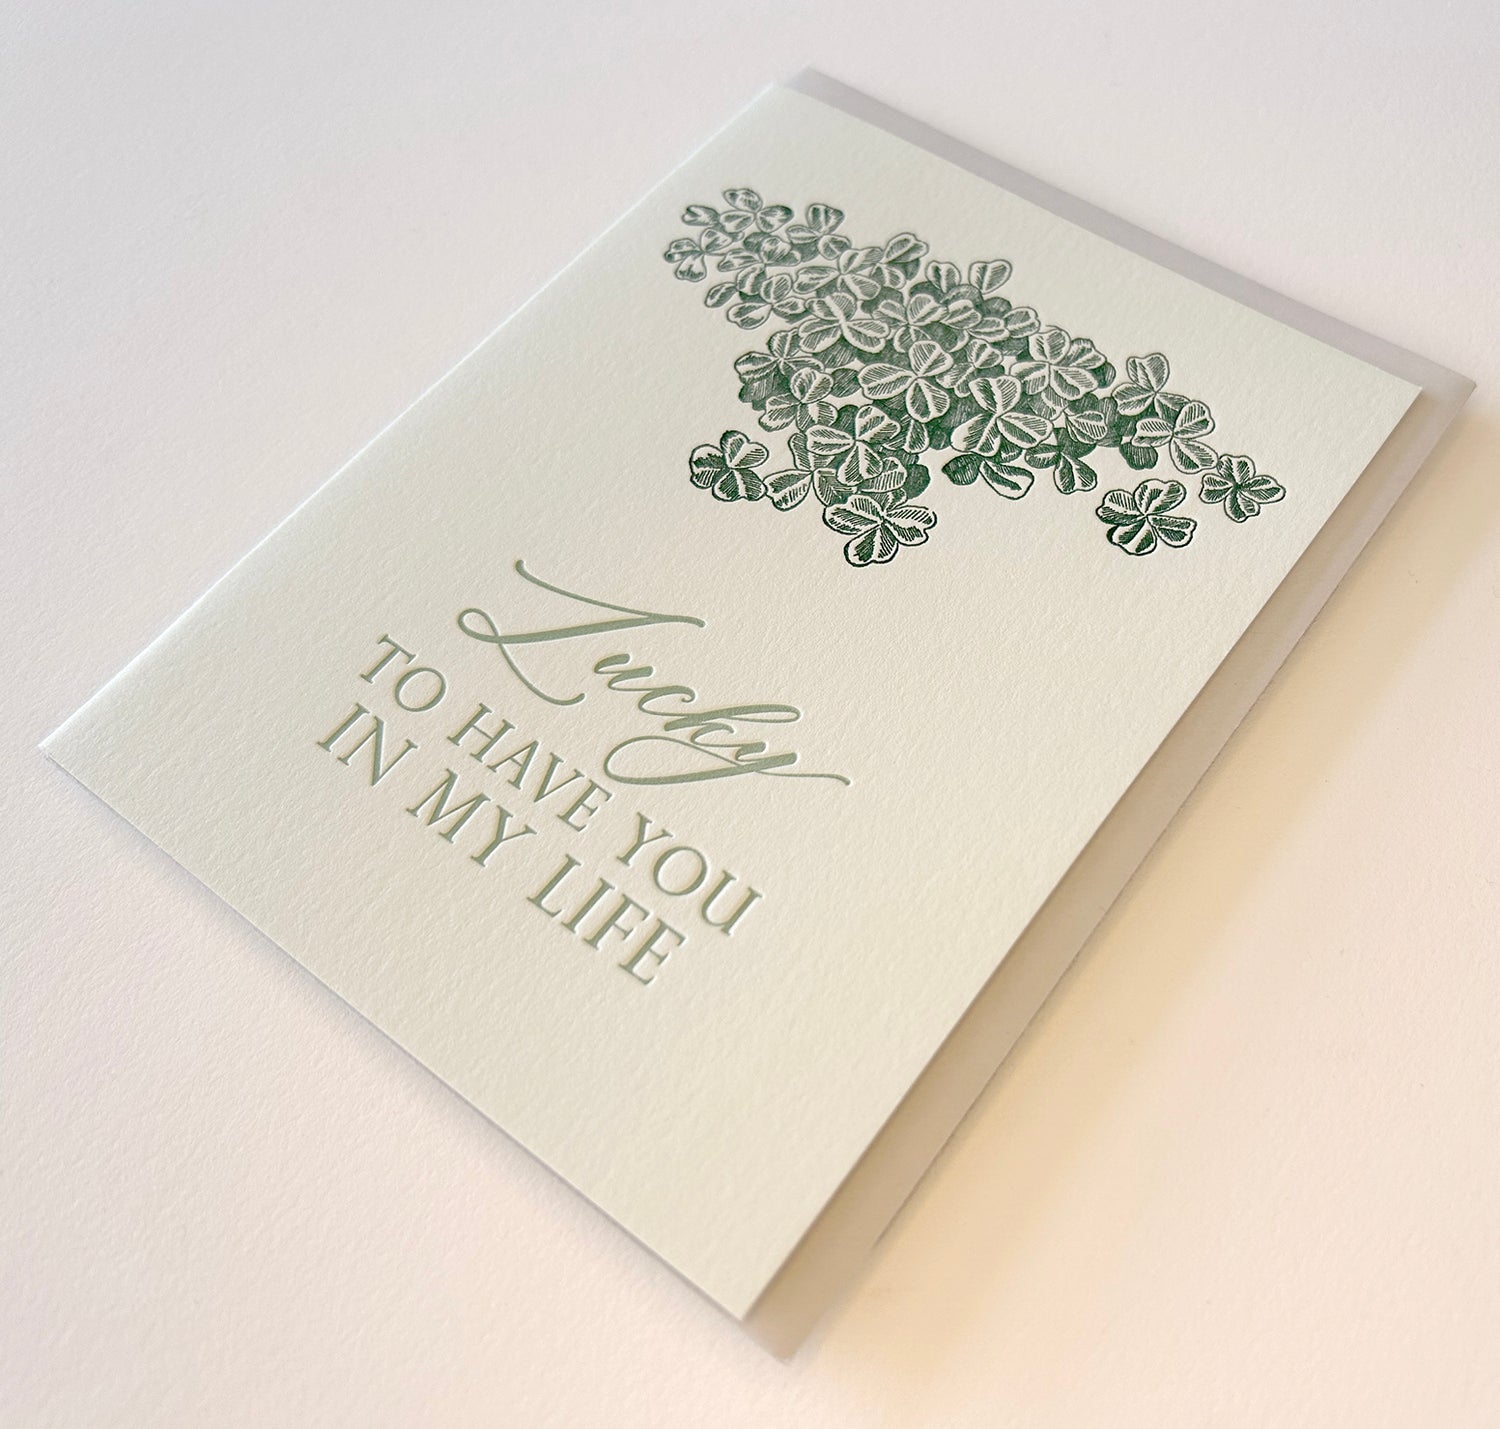 Letterpress card with shamrocks that says "Lucky to have you in my life" by Rust Belt Love